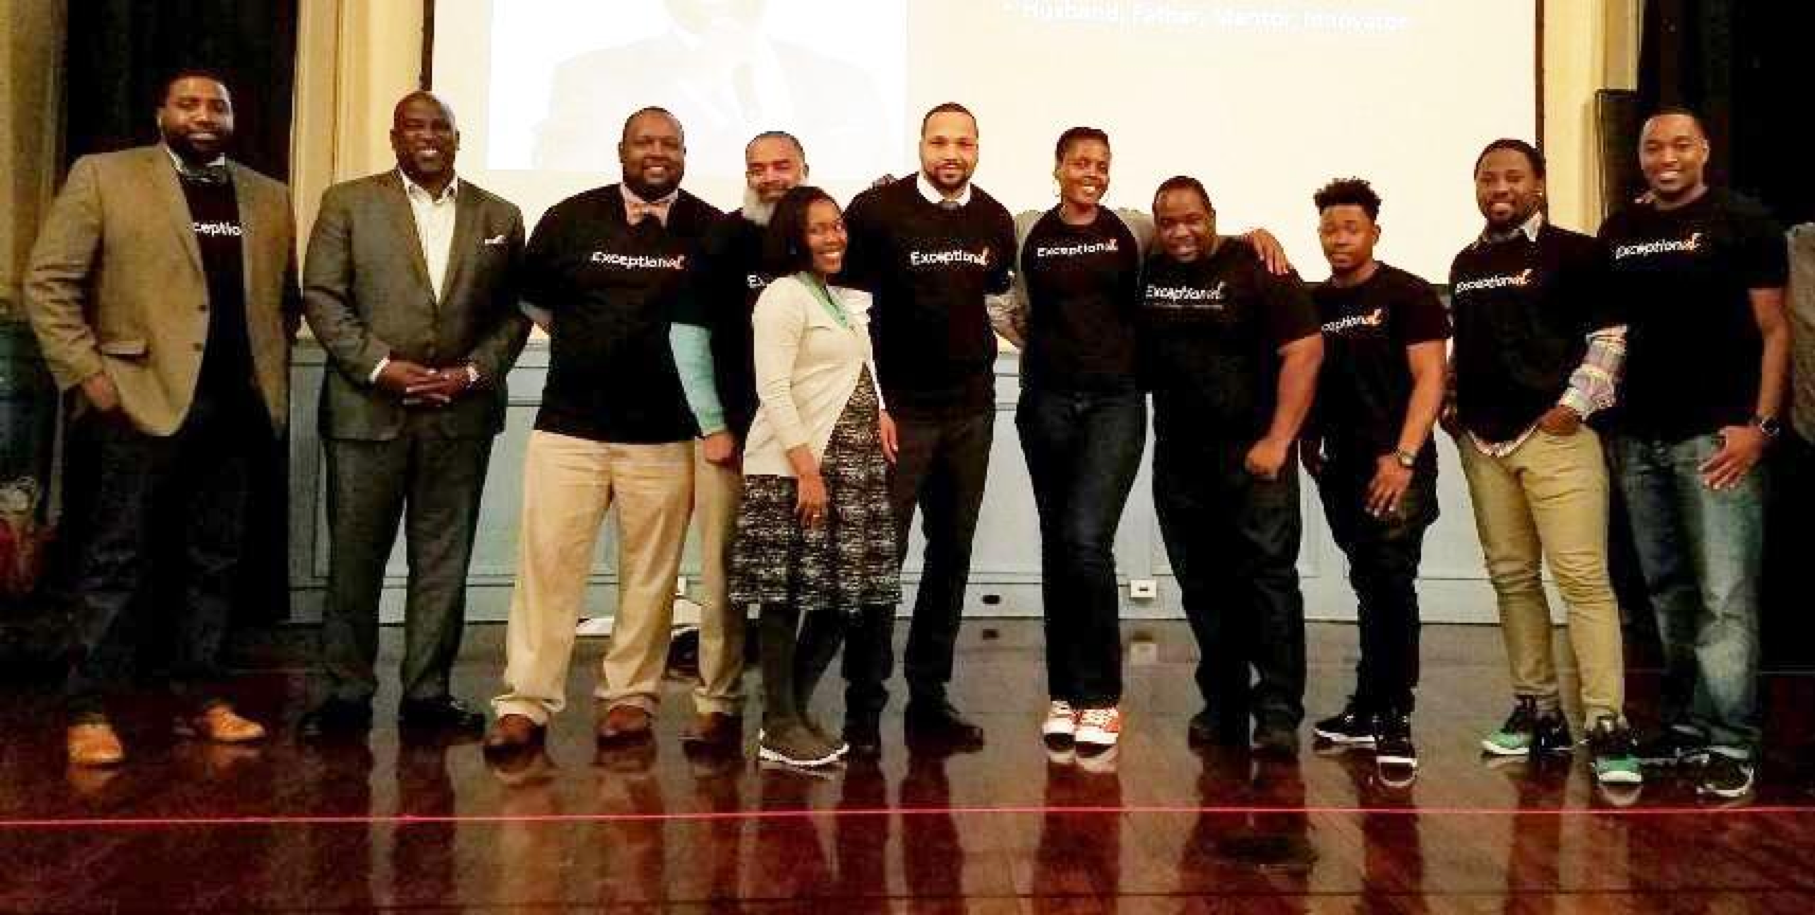 Men of The ExceptionAL Project after a Community Conversation in Newark, NJ